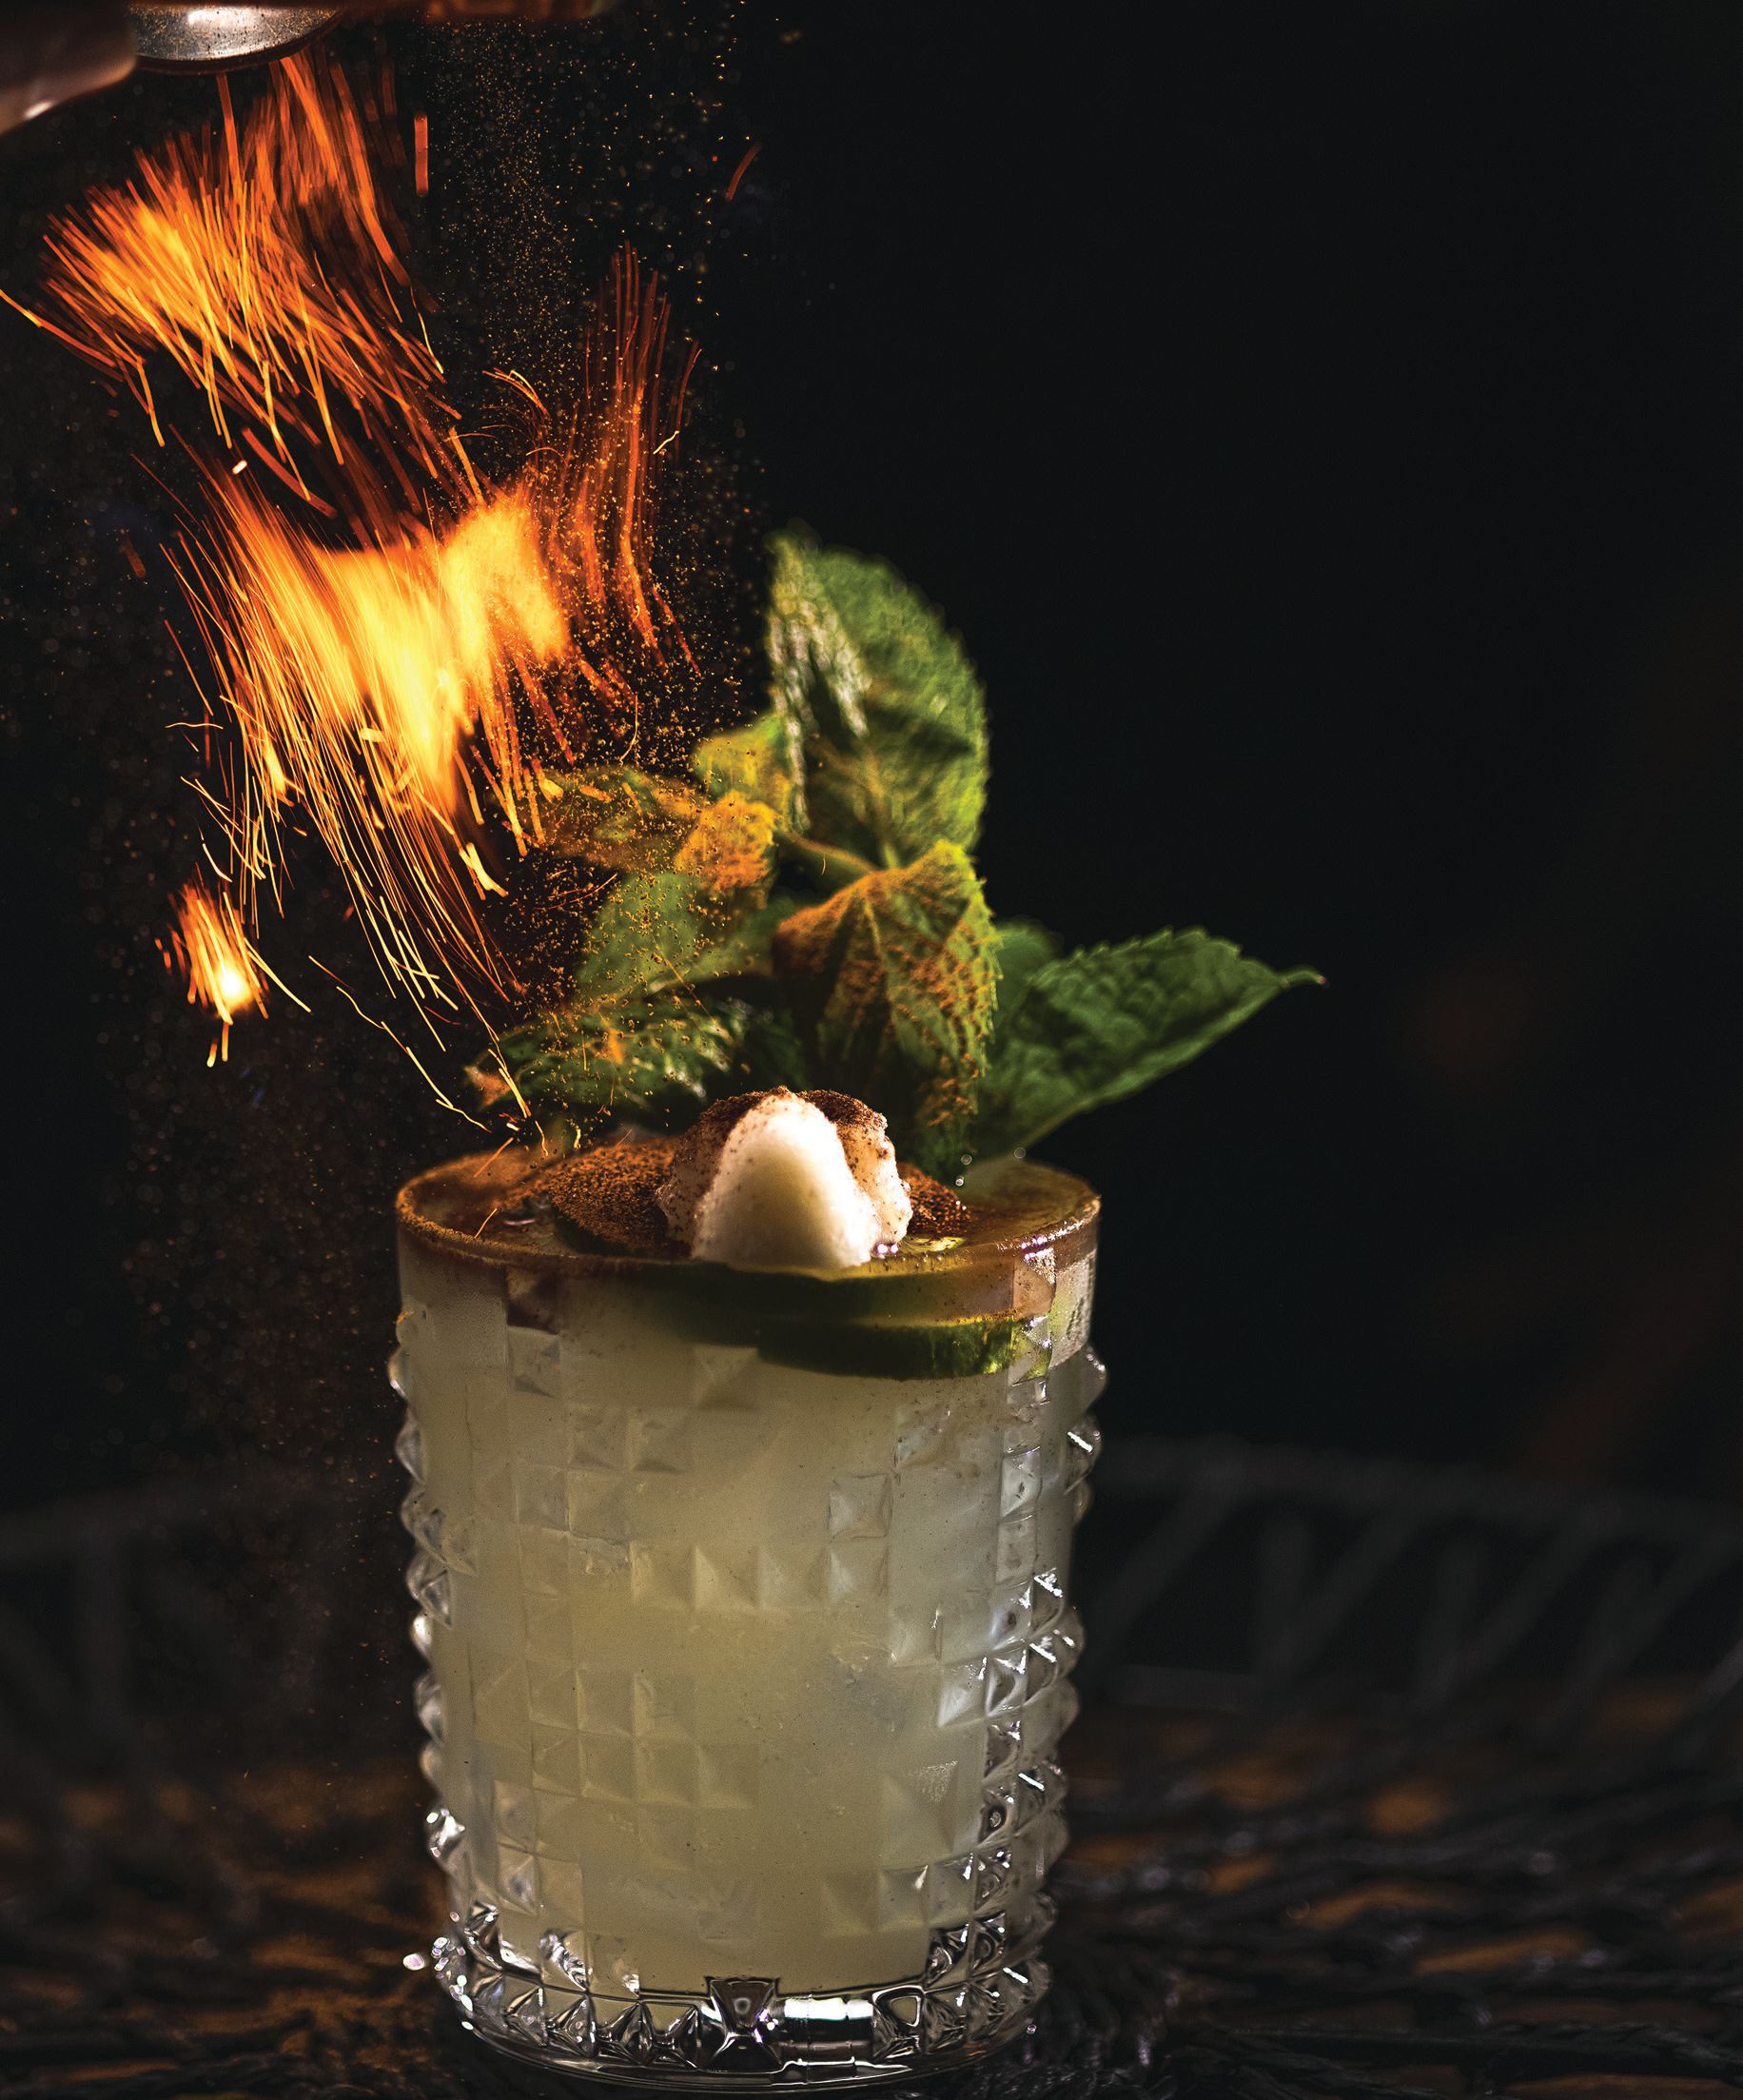 The flaming Ghost Rider margarita includes Olmeca Altos Plata tequila, fresh mint, lime and agave. FOOD AND DRINK PHOTO BY TJ PEREZ